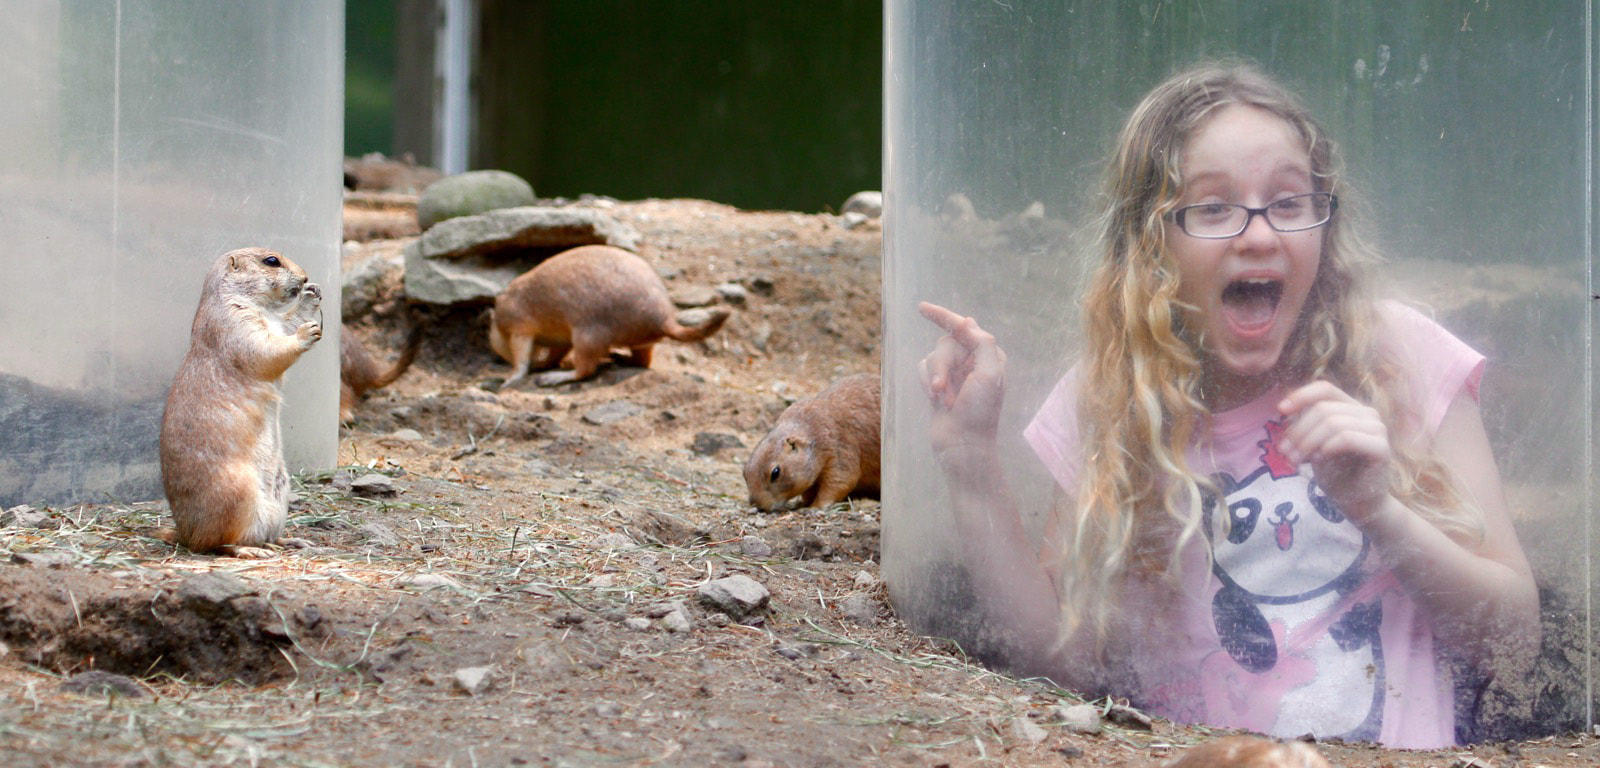 Child in Prairie Dog Tunnel surrounded by prairie dogs